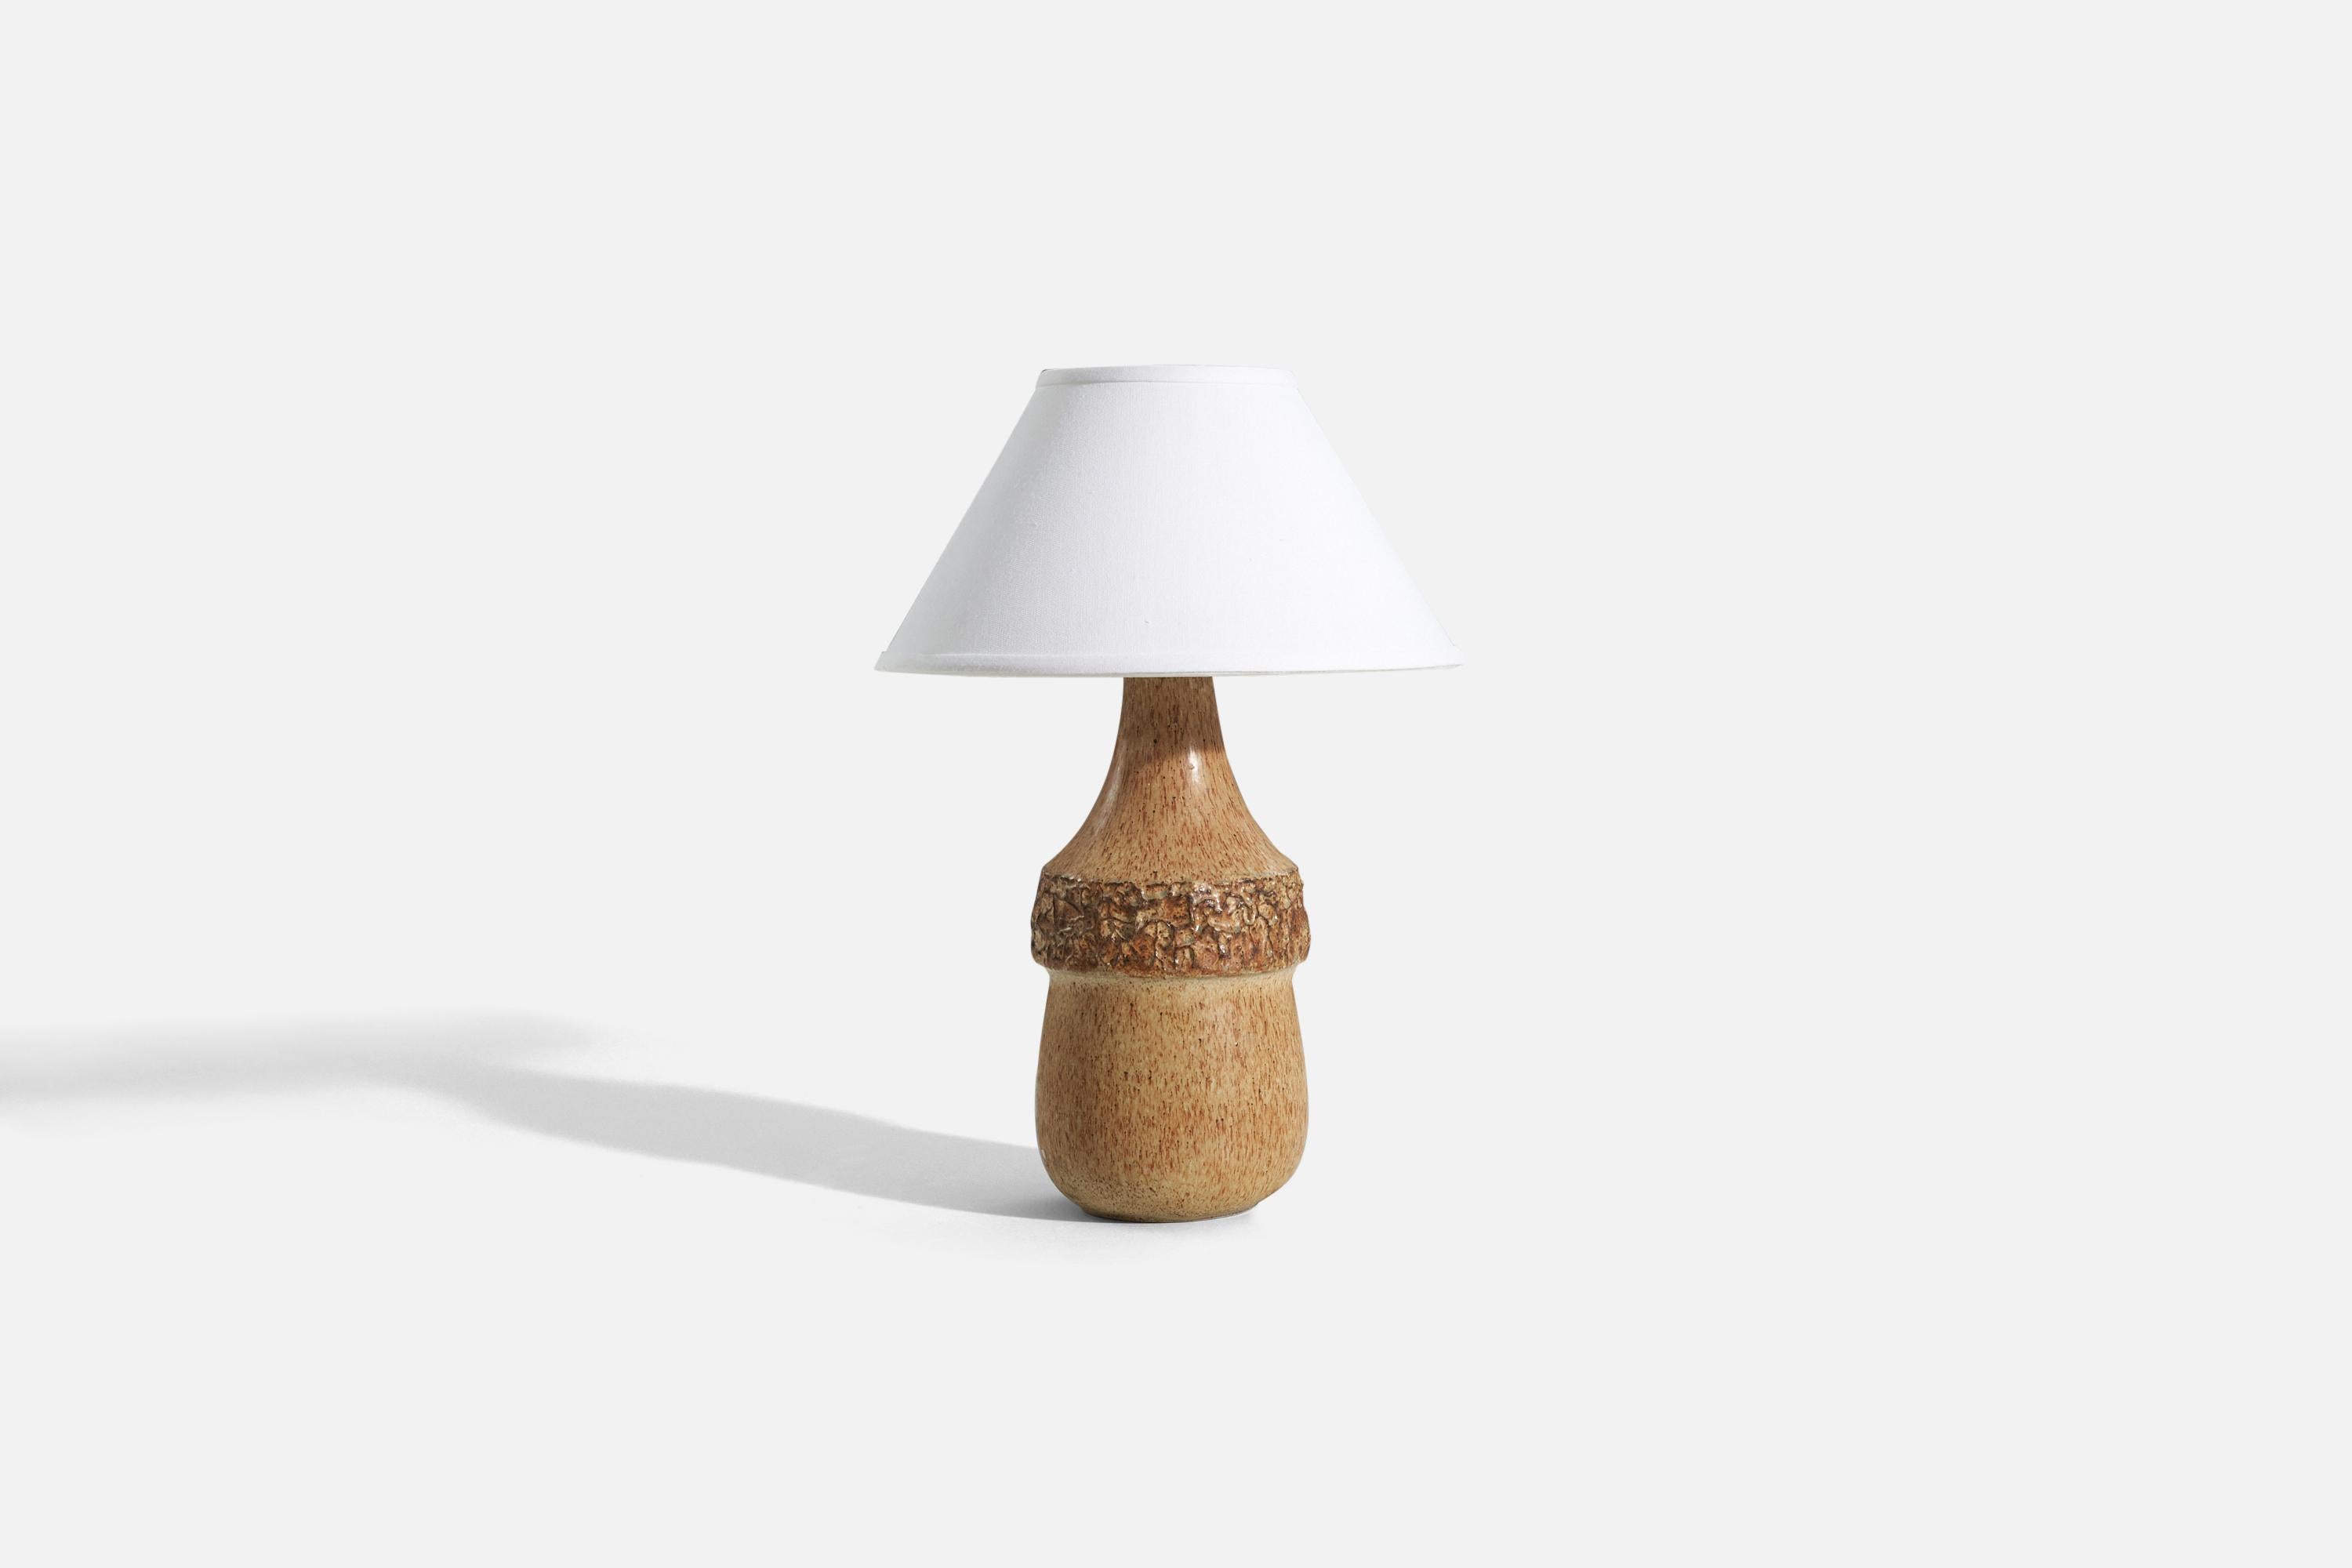 A brown-glazed stoneware table lamp designed by Bruno Karlsson and produced by Ego Stengods, Sweden, c. 1960s.

Sold without lampshade. 
Dimensions of Lamp (inches) : 14.875 x 6 x 6 (H x W x D)
Dimensions of Shade (inches) : 5 x 12.25 x 7.25 (T